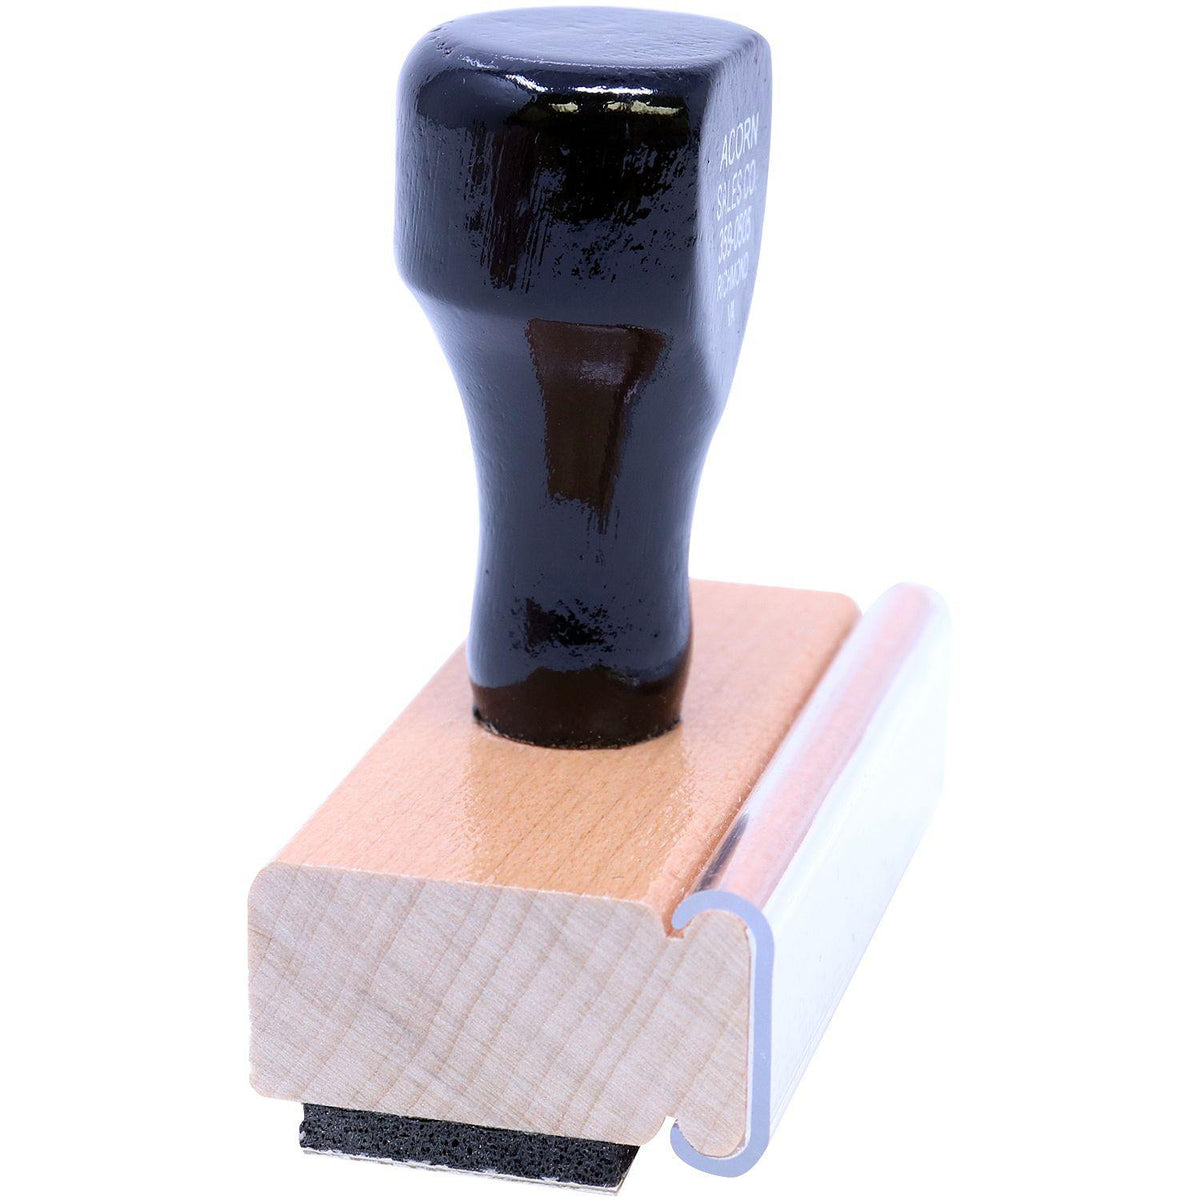 Side View of Great Rubber Stamp at an Angle